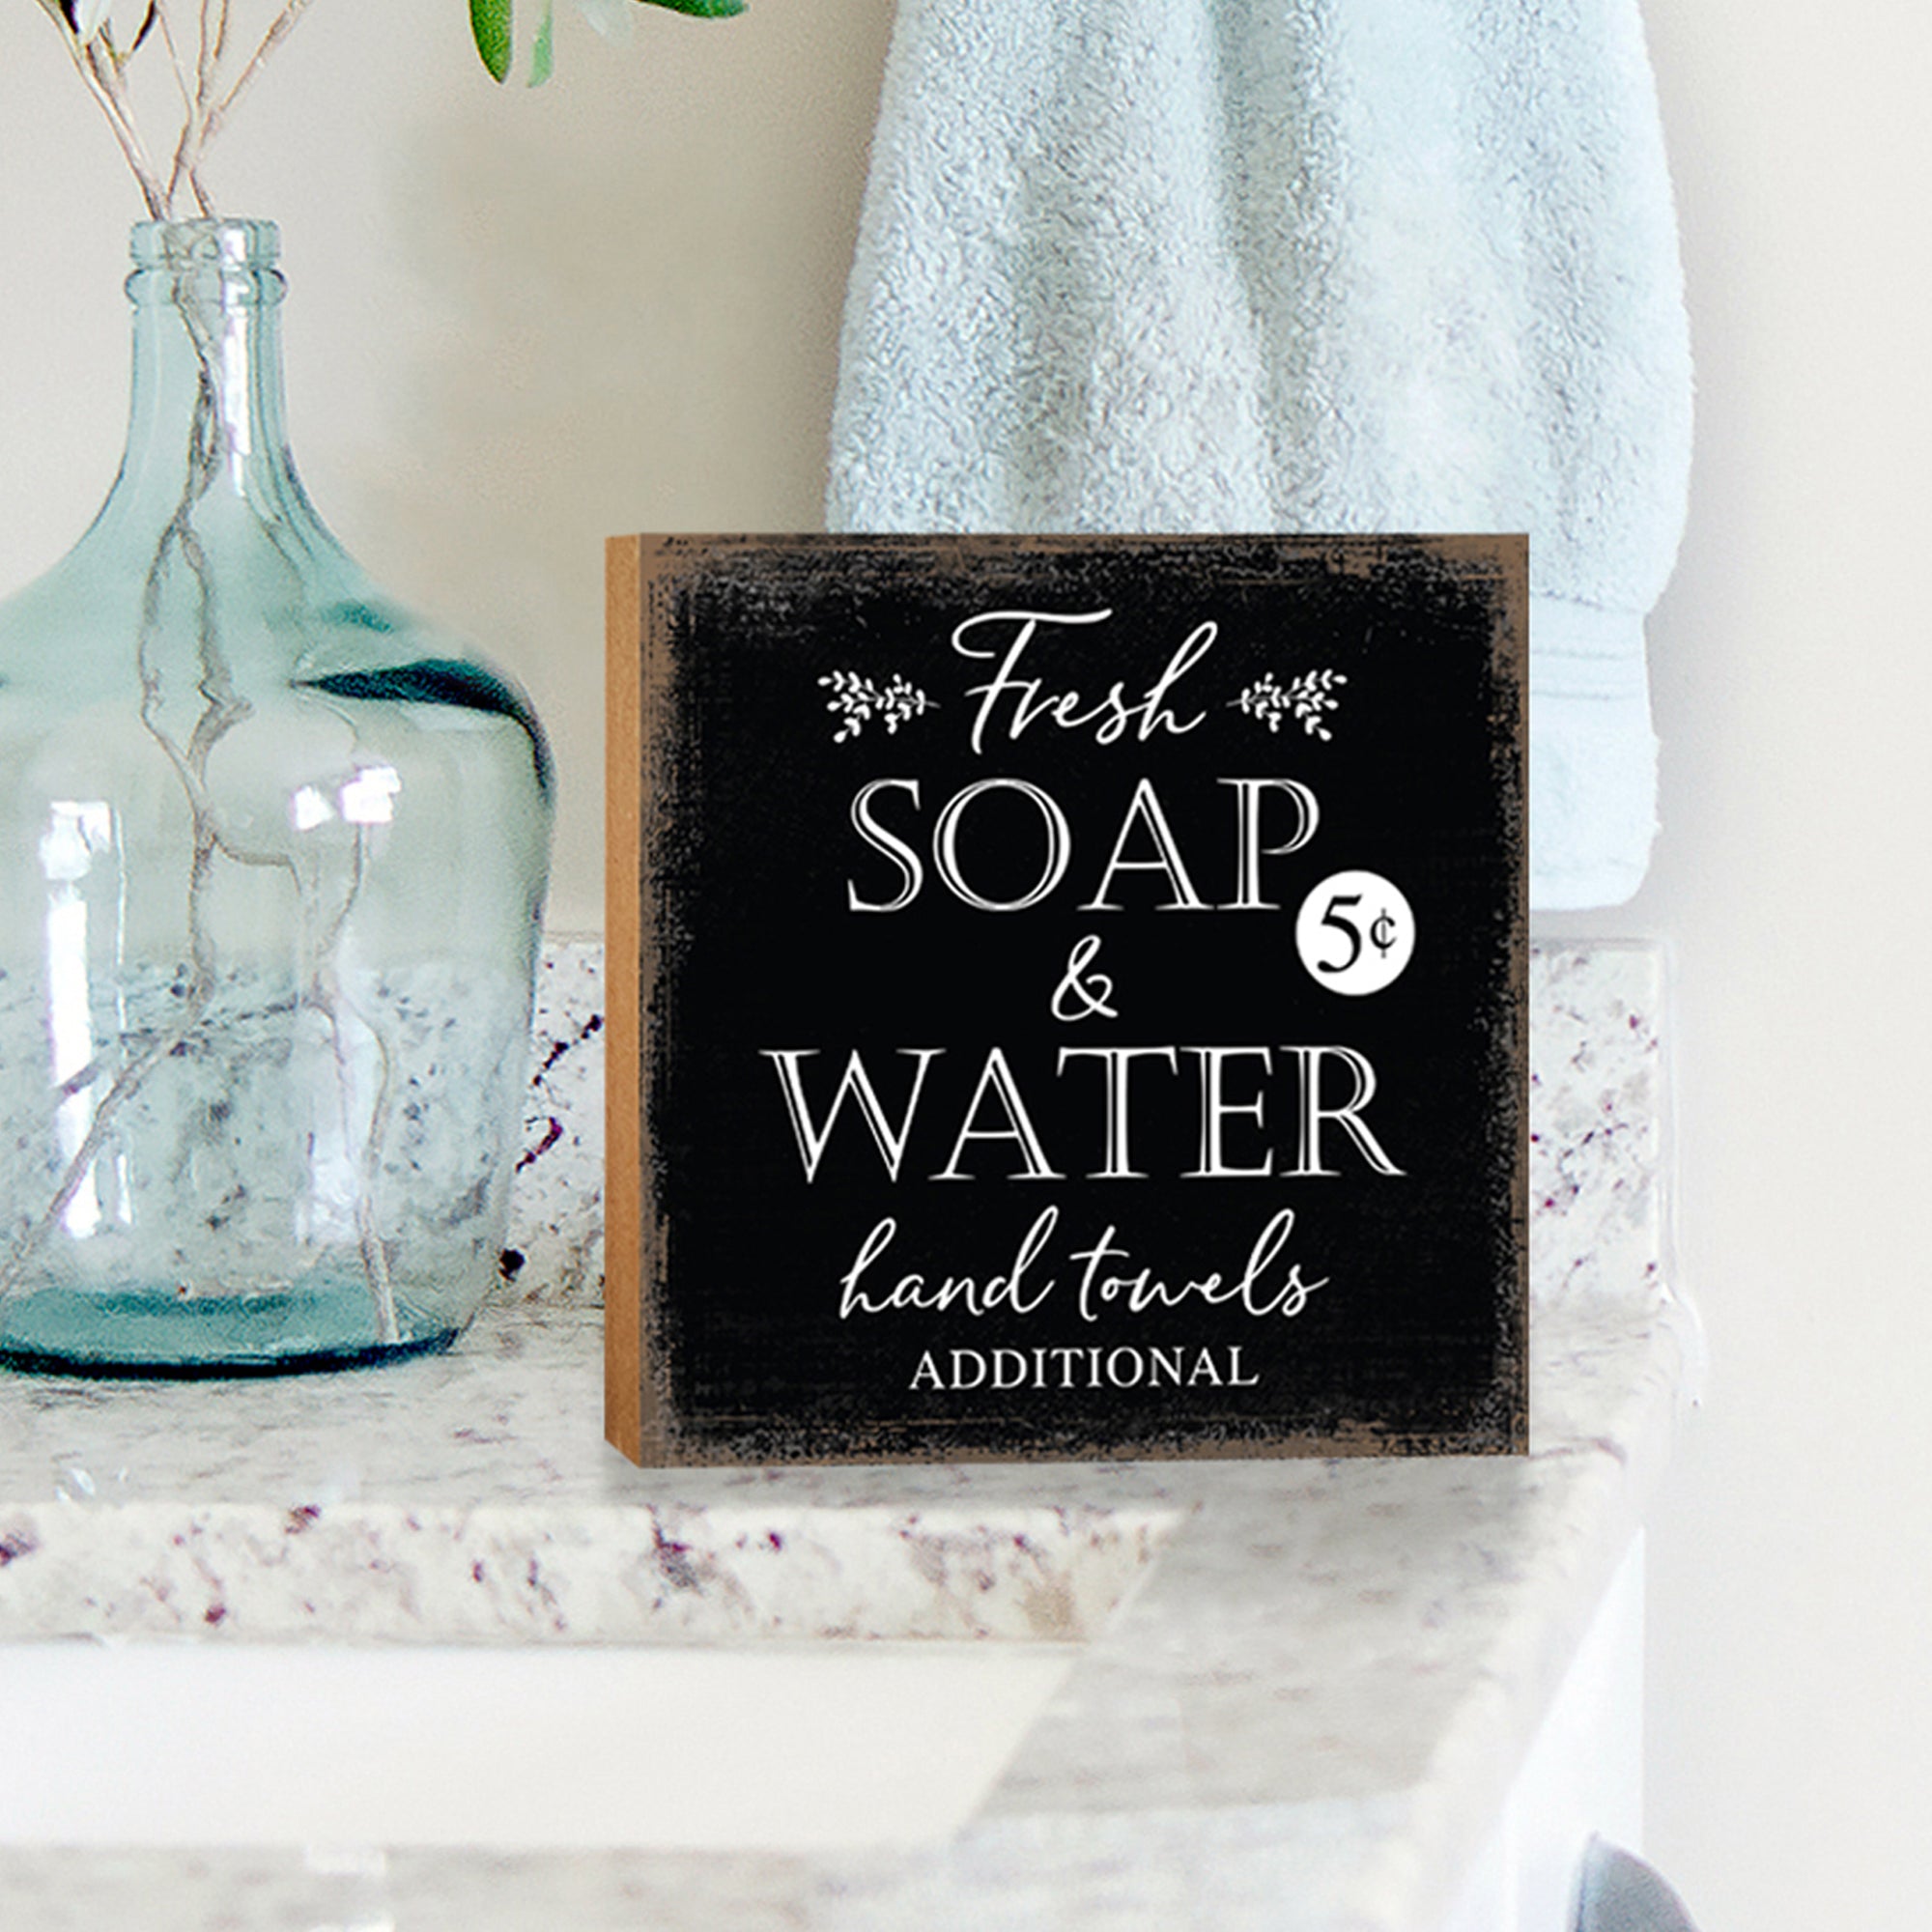 Wooden BATHROOM 6x6 Block shelf decor (Fresh Soap & Water Additional) Inspirational Plaque Tabletop and Family Home Decoration